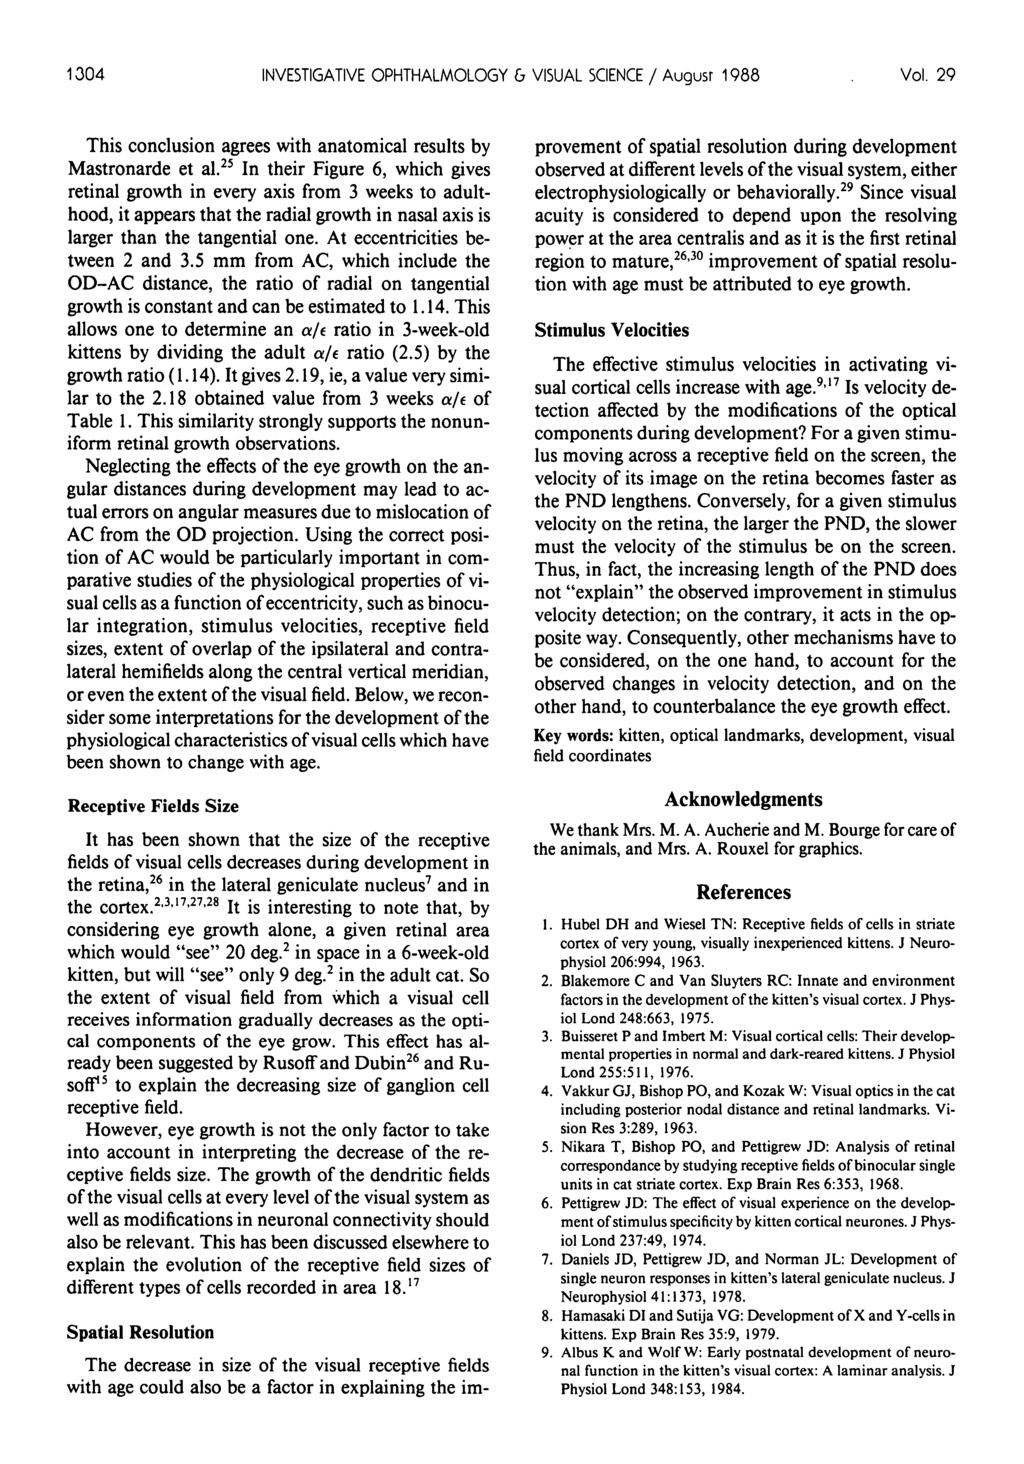 1304 INVESTIGATIVE OPHTHALMOLOGY 6 VISUAL SCIENCE / August 1988 Vol. 29 This conclusion agrees with anatomical results by Mastronarde et al.